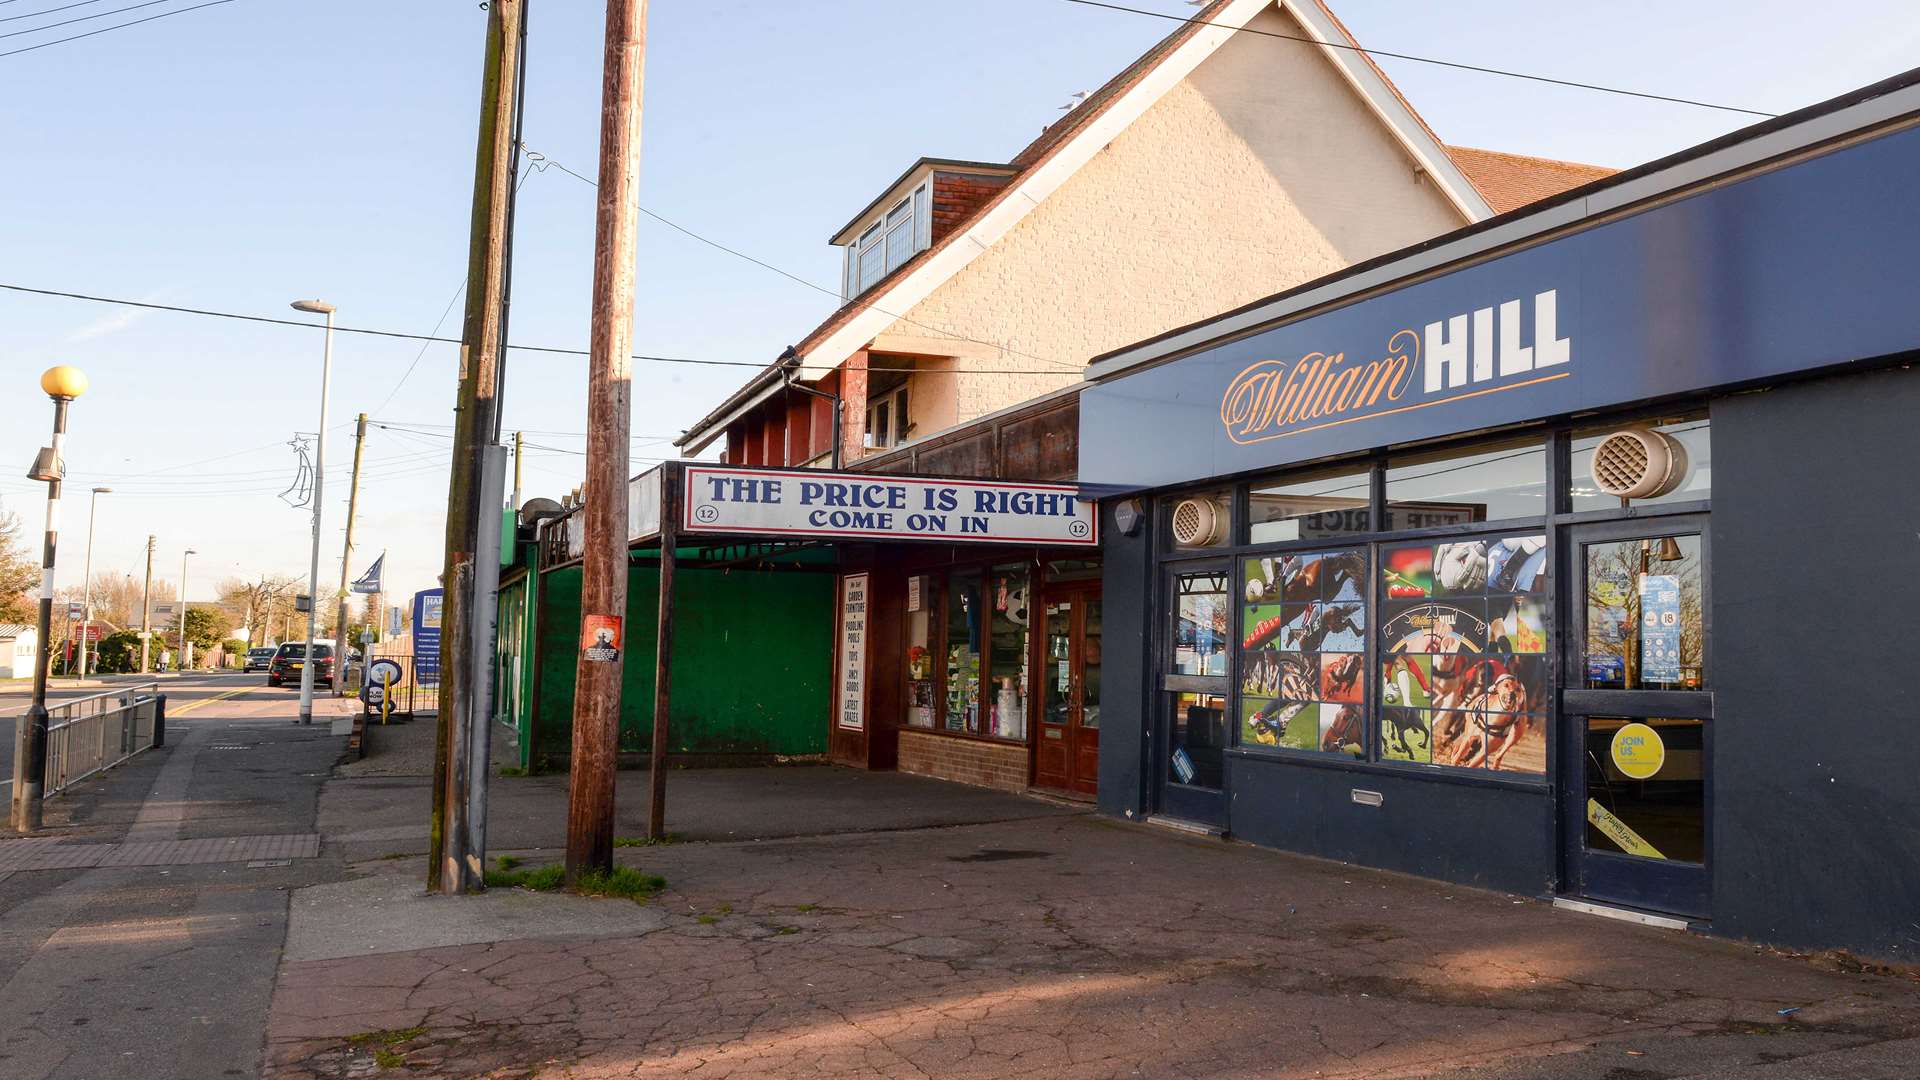 William Hill's betting shop at Leysdown. Picture: Steve Finn Photography